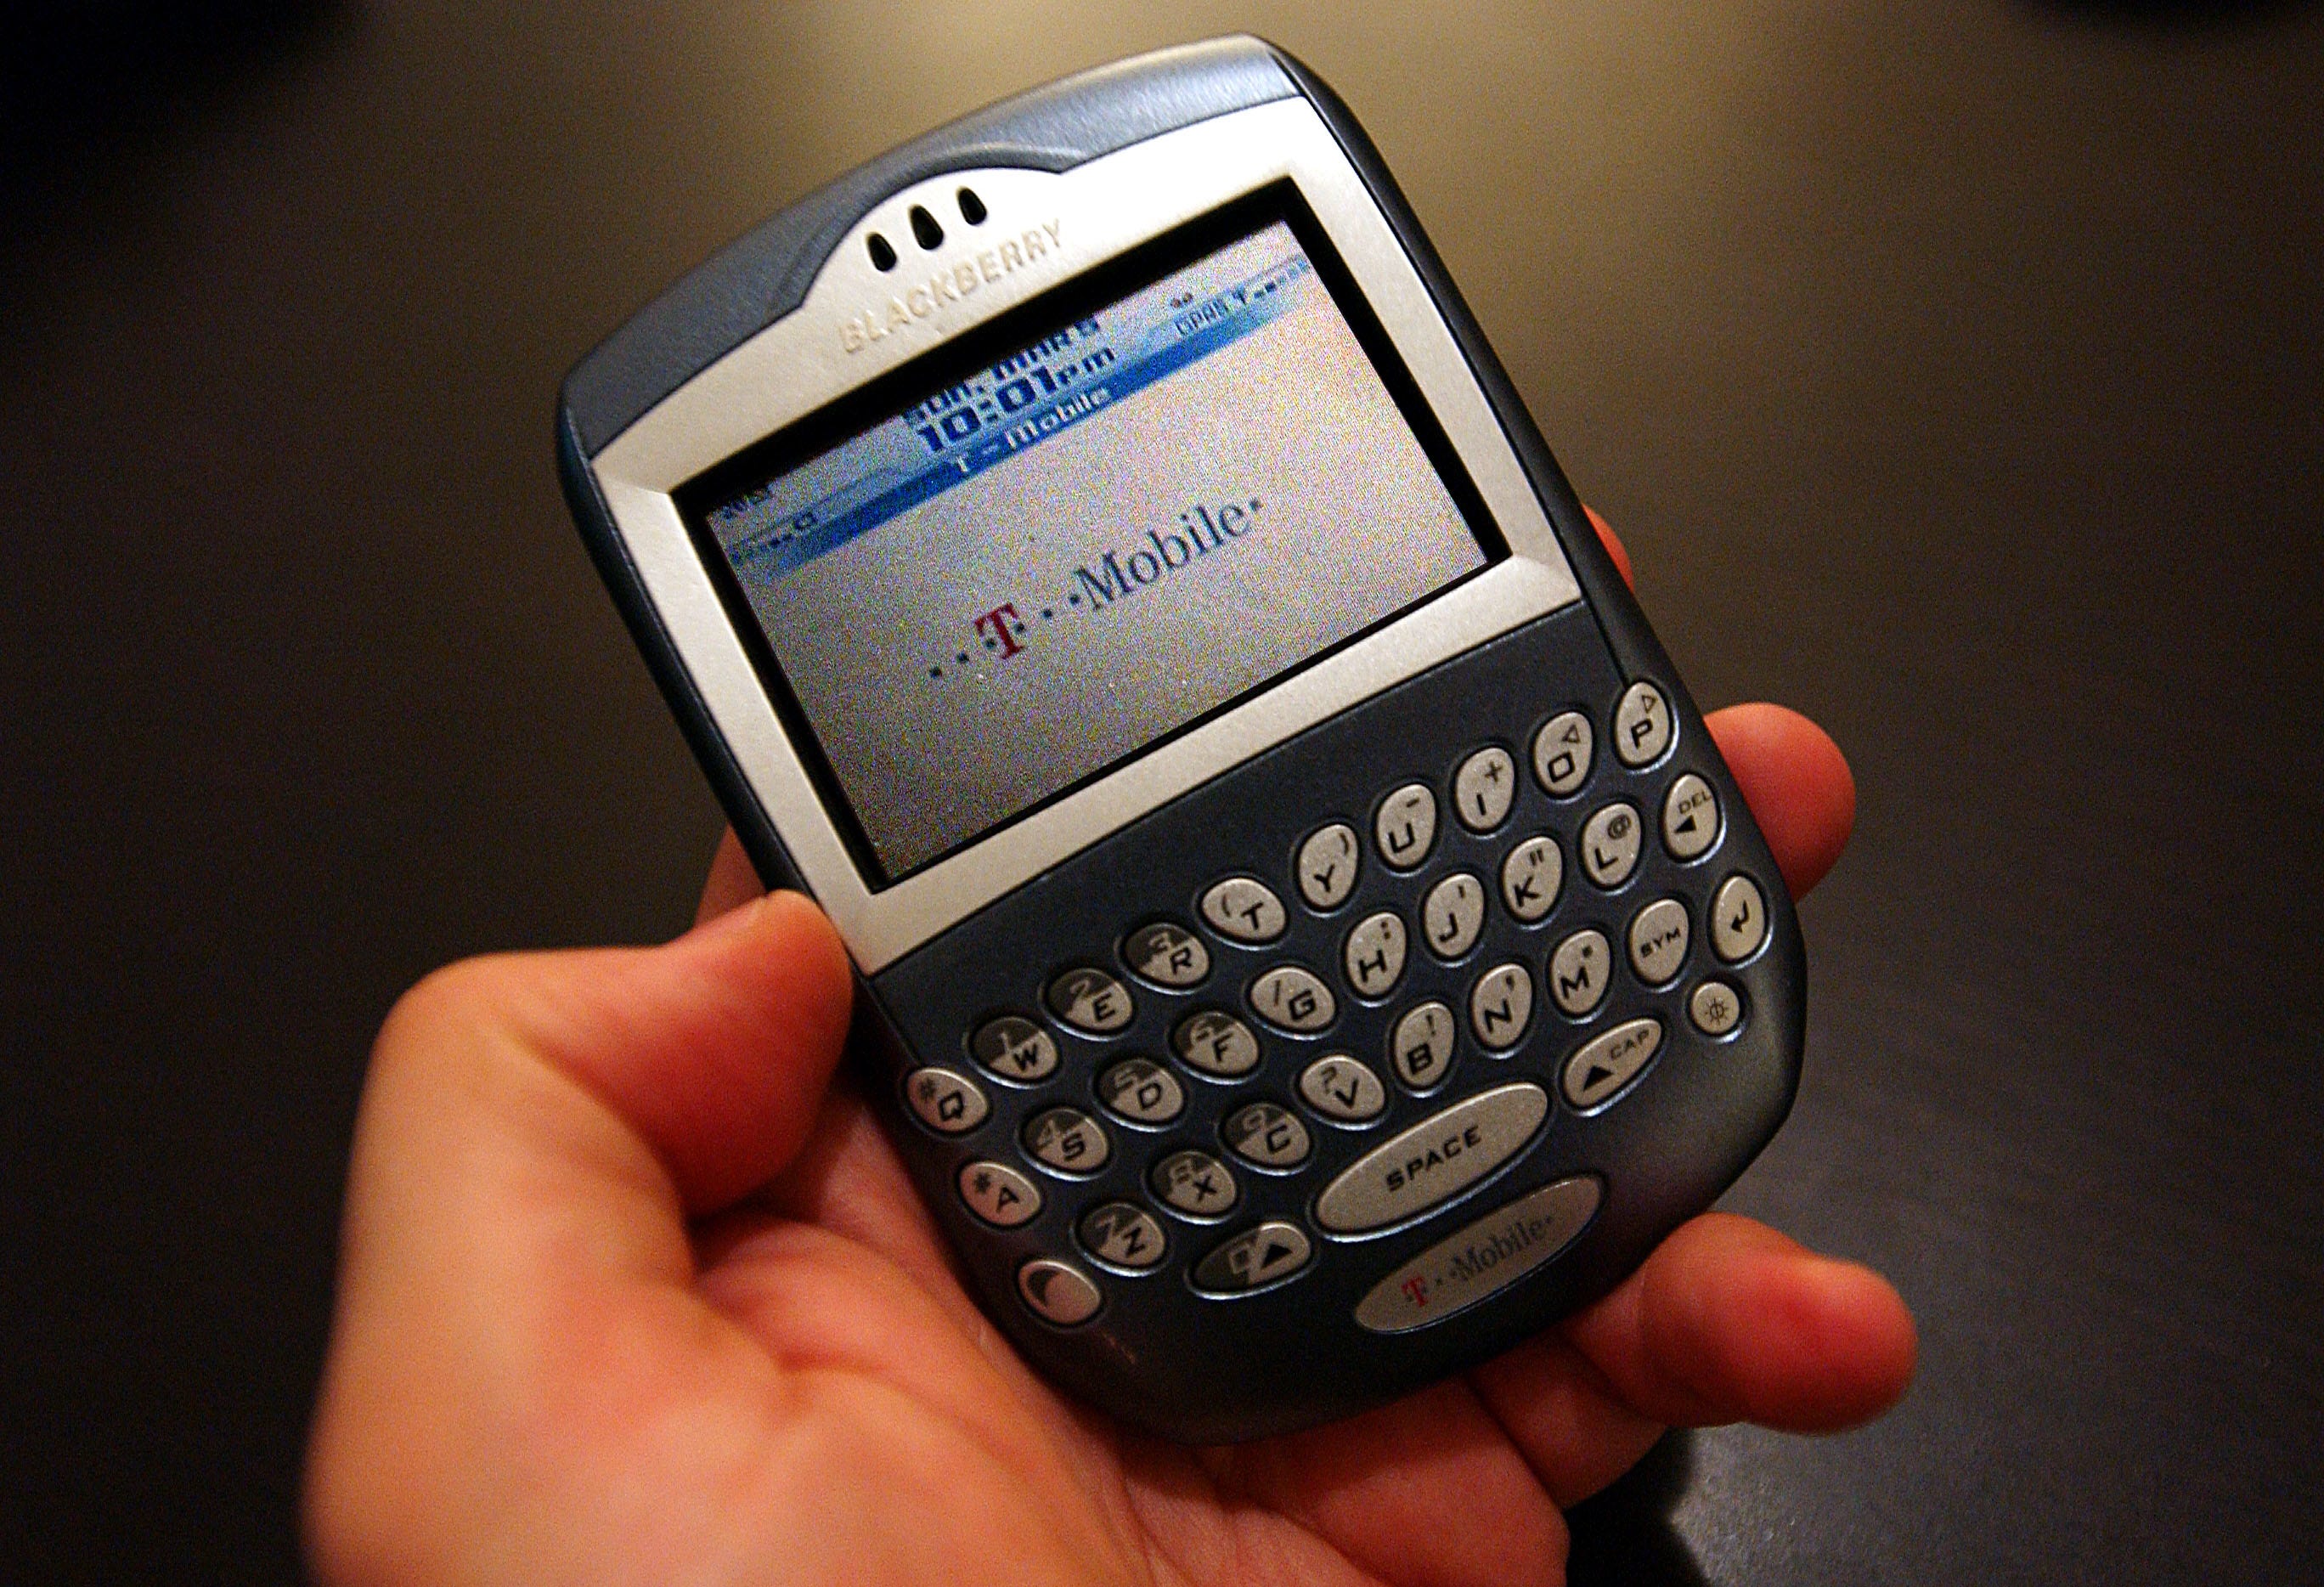 The Original Blackberry Was Ahead Of Its Time Onezero - new models of blackberry phone coming to us